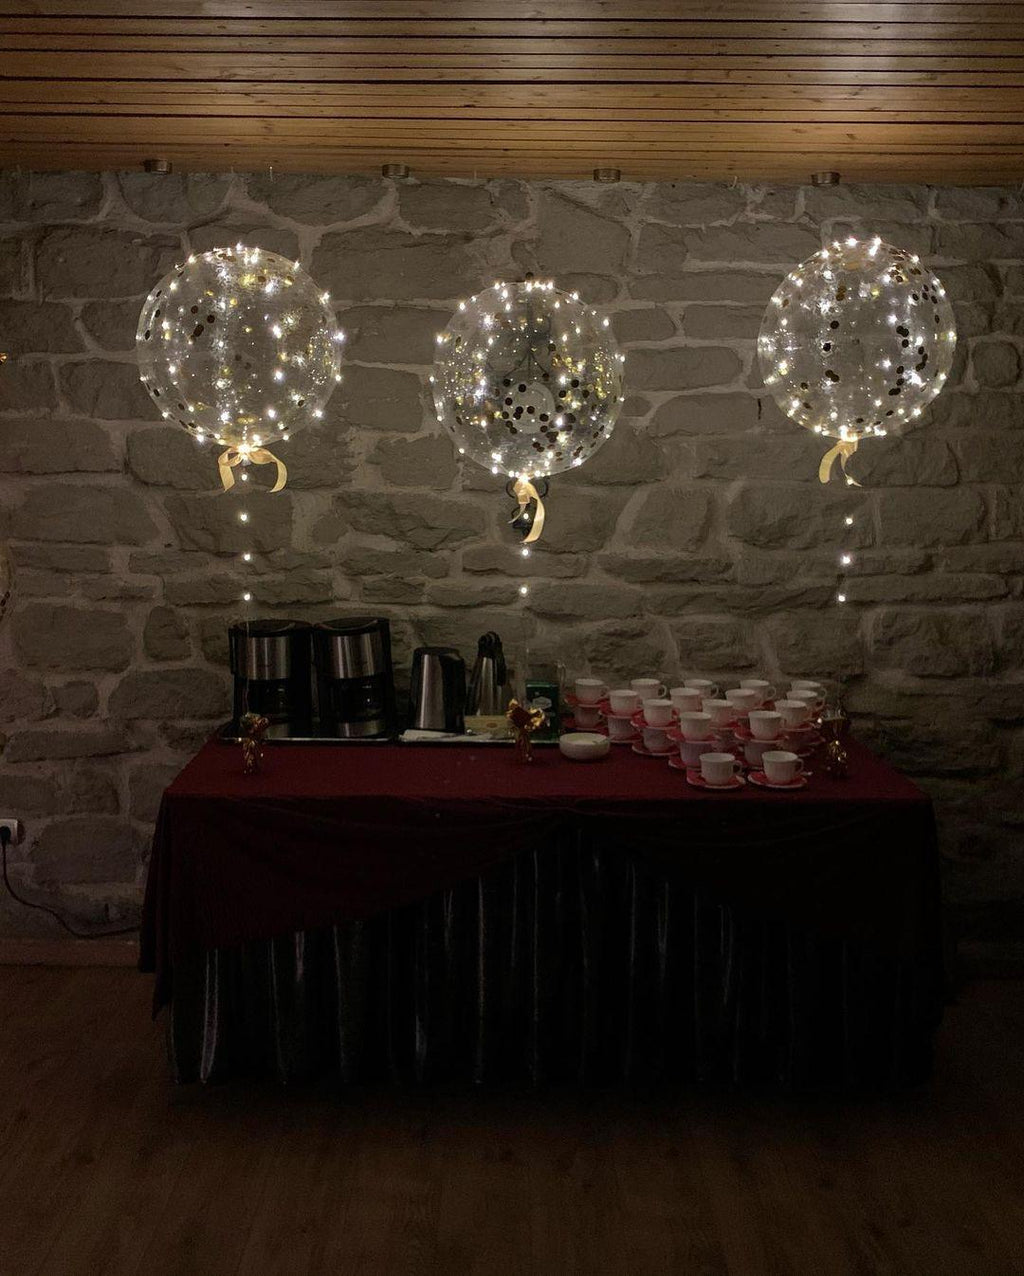 Celebrate in Style: LED Balloons for Weddings, Proms & Holidays - Lasercutwraps Shop